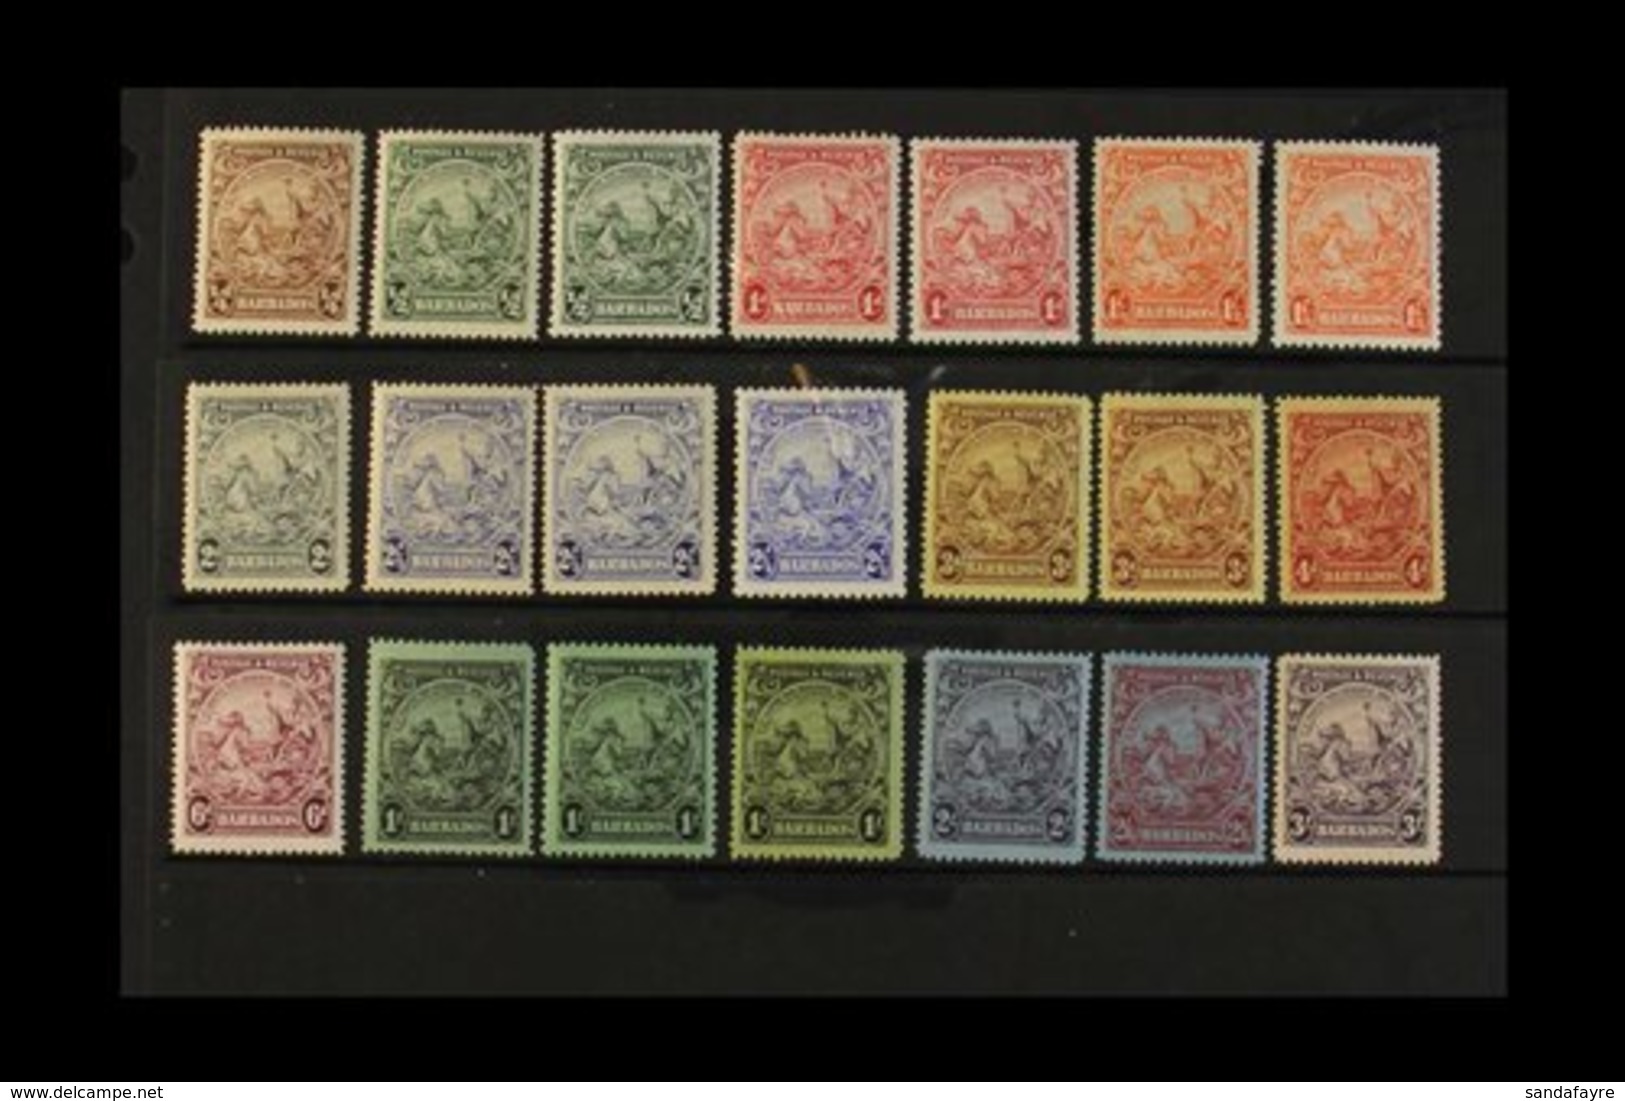 1925-35 Complete Set, SG 229/239, Plus All Additional Listed Perfs And Shades, Very Fine Mint, The 1s Perf.13½ X 12½ Is  - Barbados (...-1966)